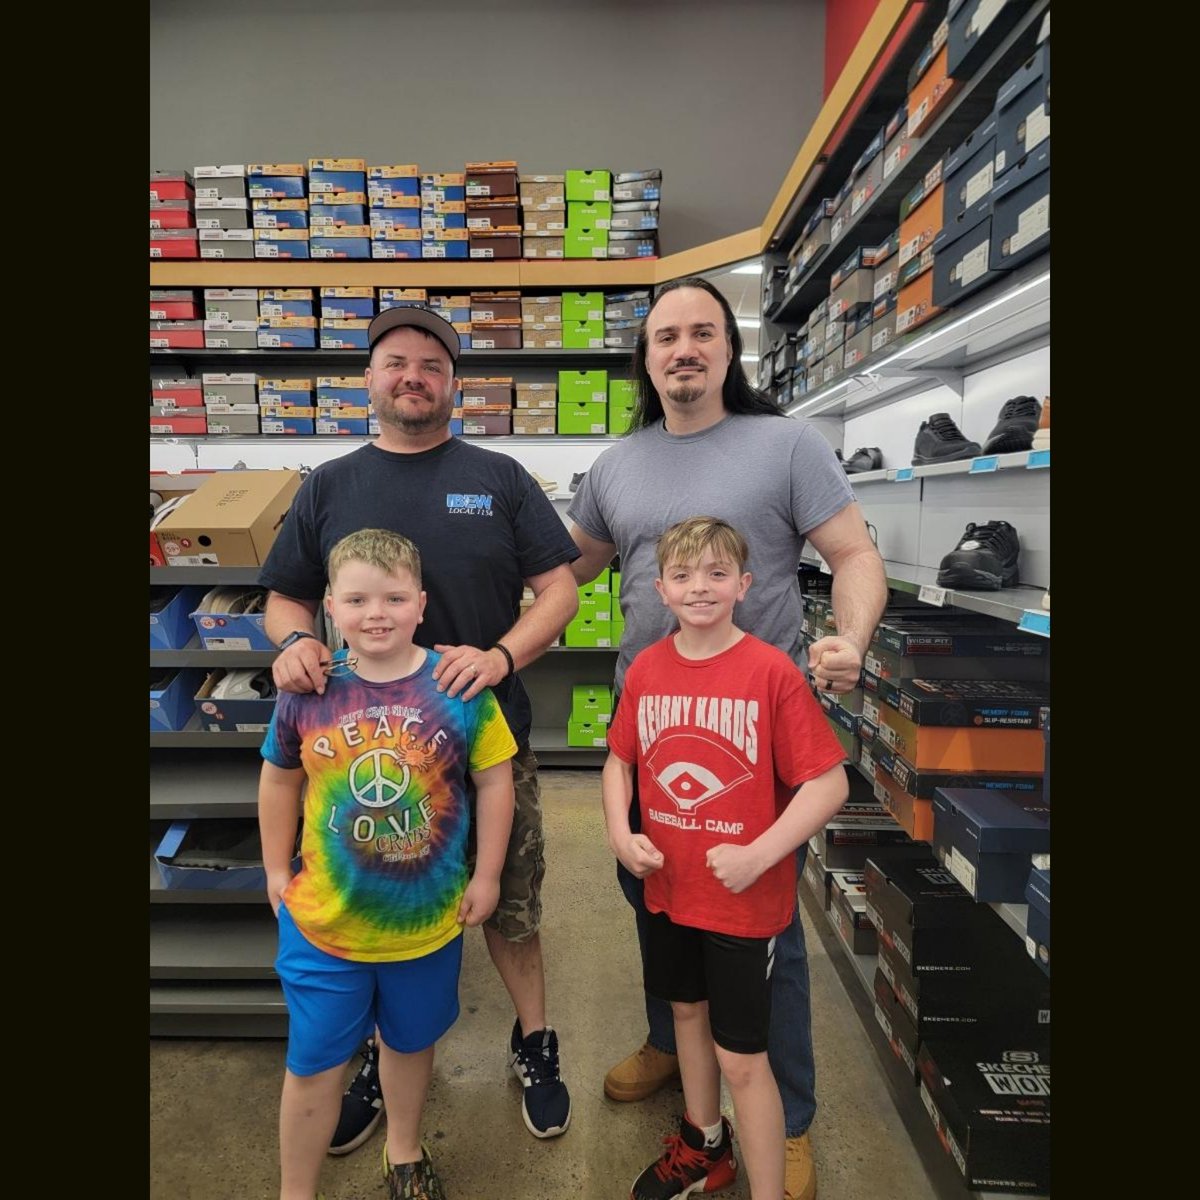 .@DarkOracleSage bump into some awesome fans from @WrestlingIWF April live event in Nutley NJ. #fan #fans #wrestling #prowrestling #lucha #luchalibres #kids #photo